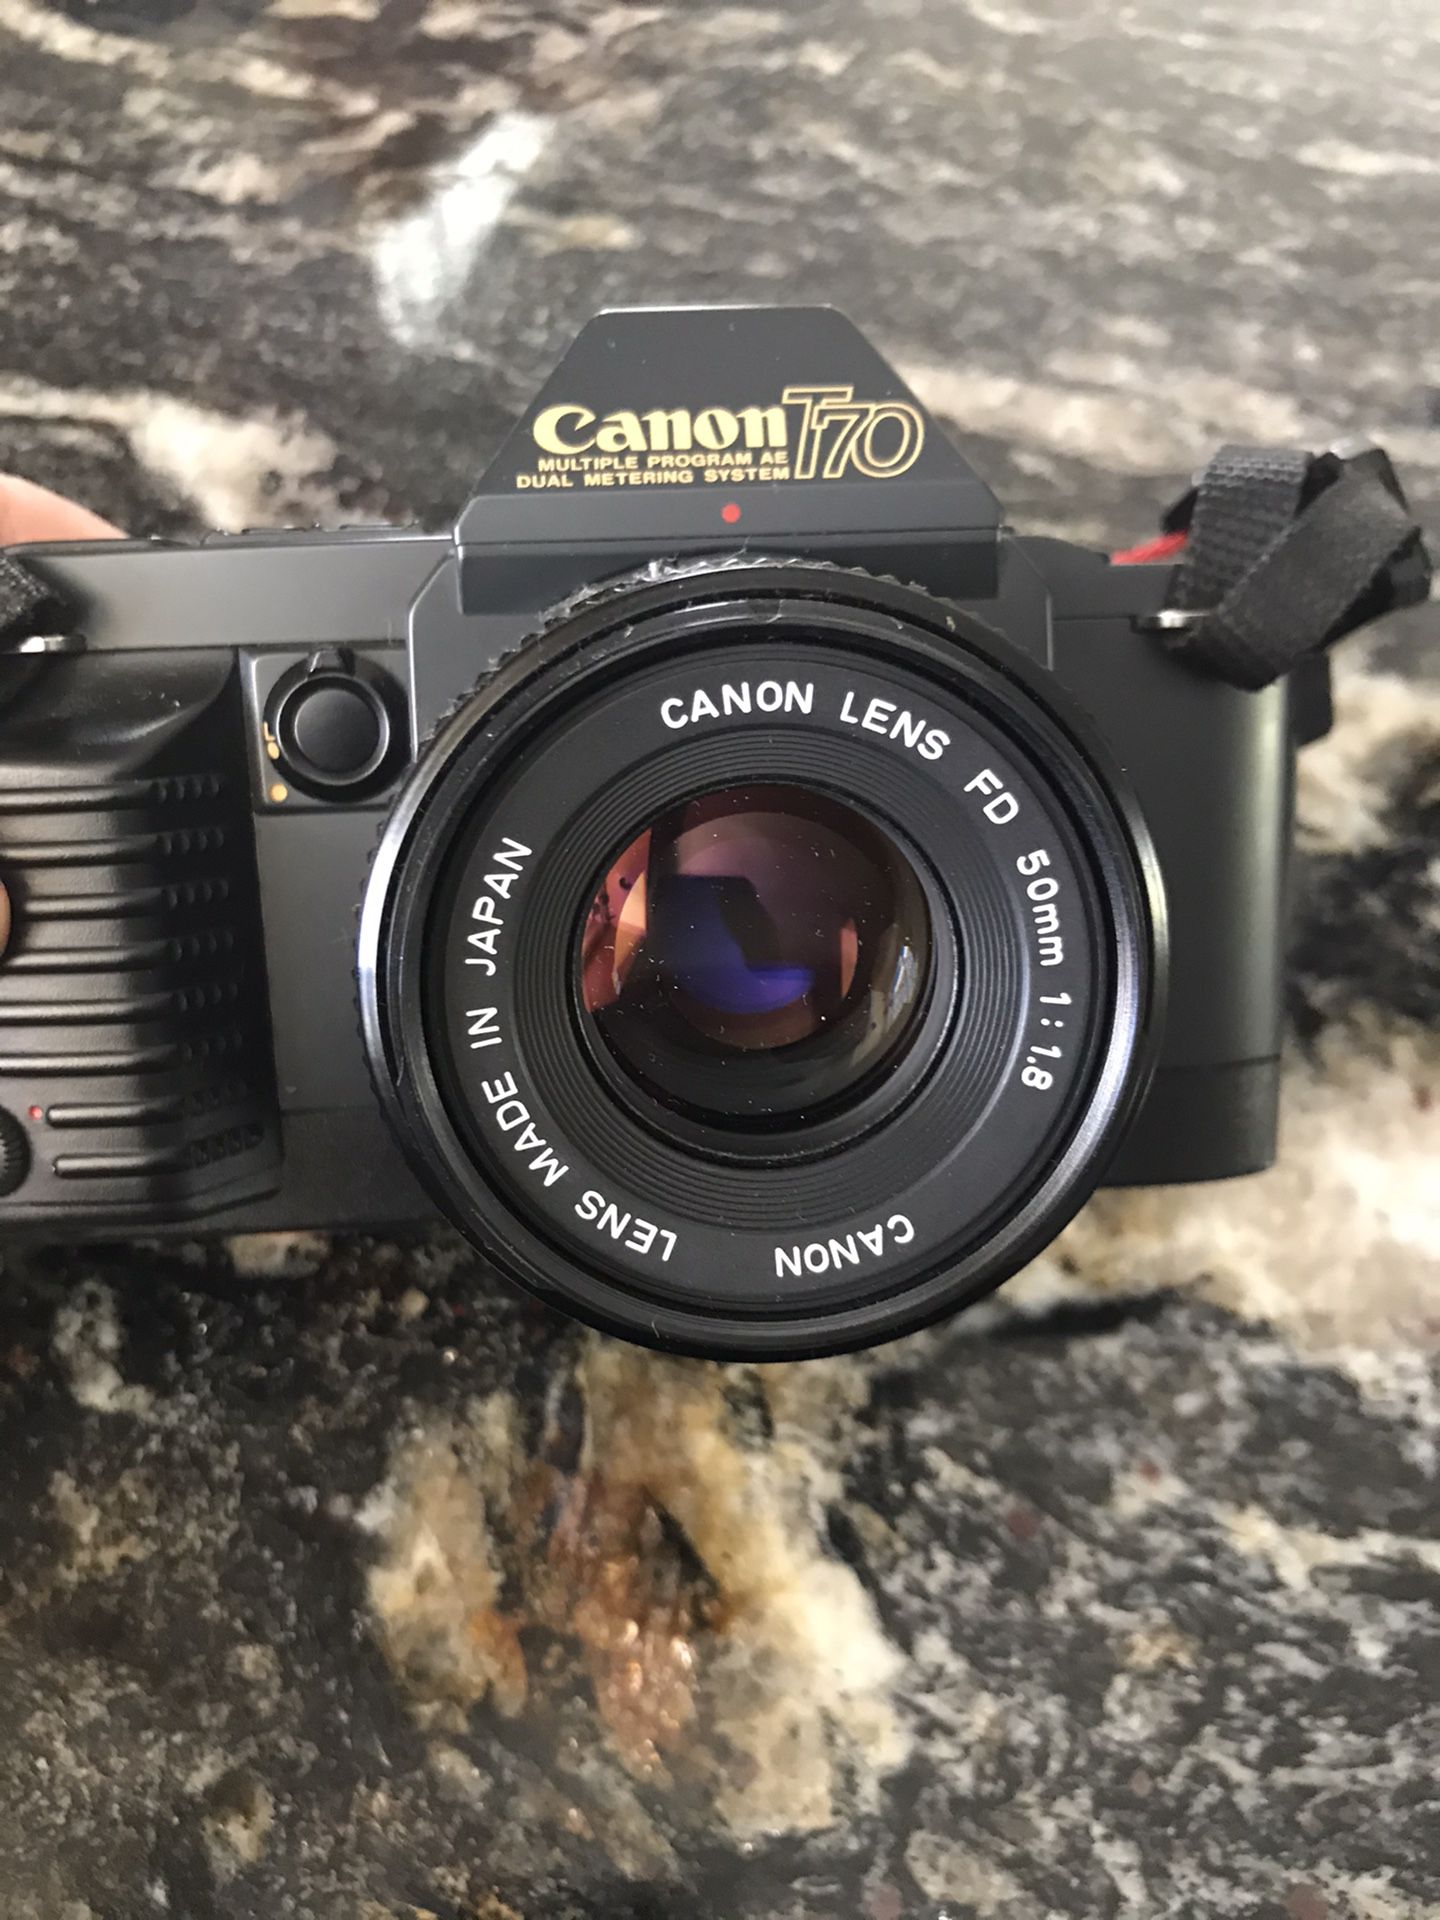 Canon T70: 35 mm camera with flash and lens